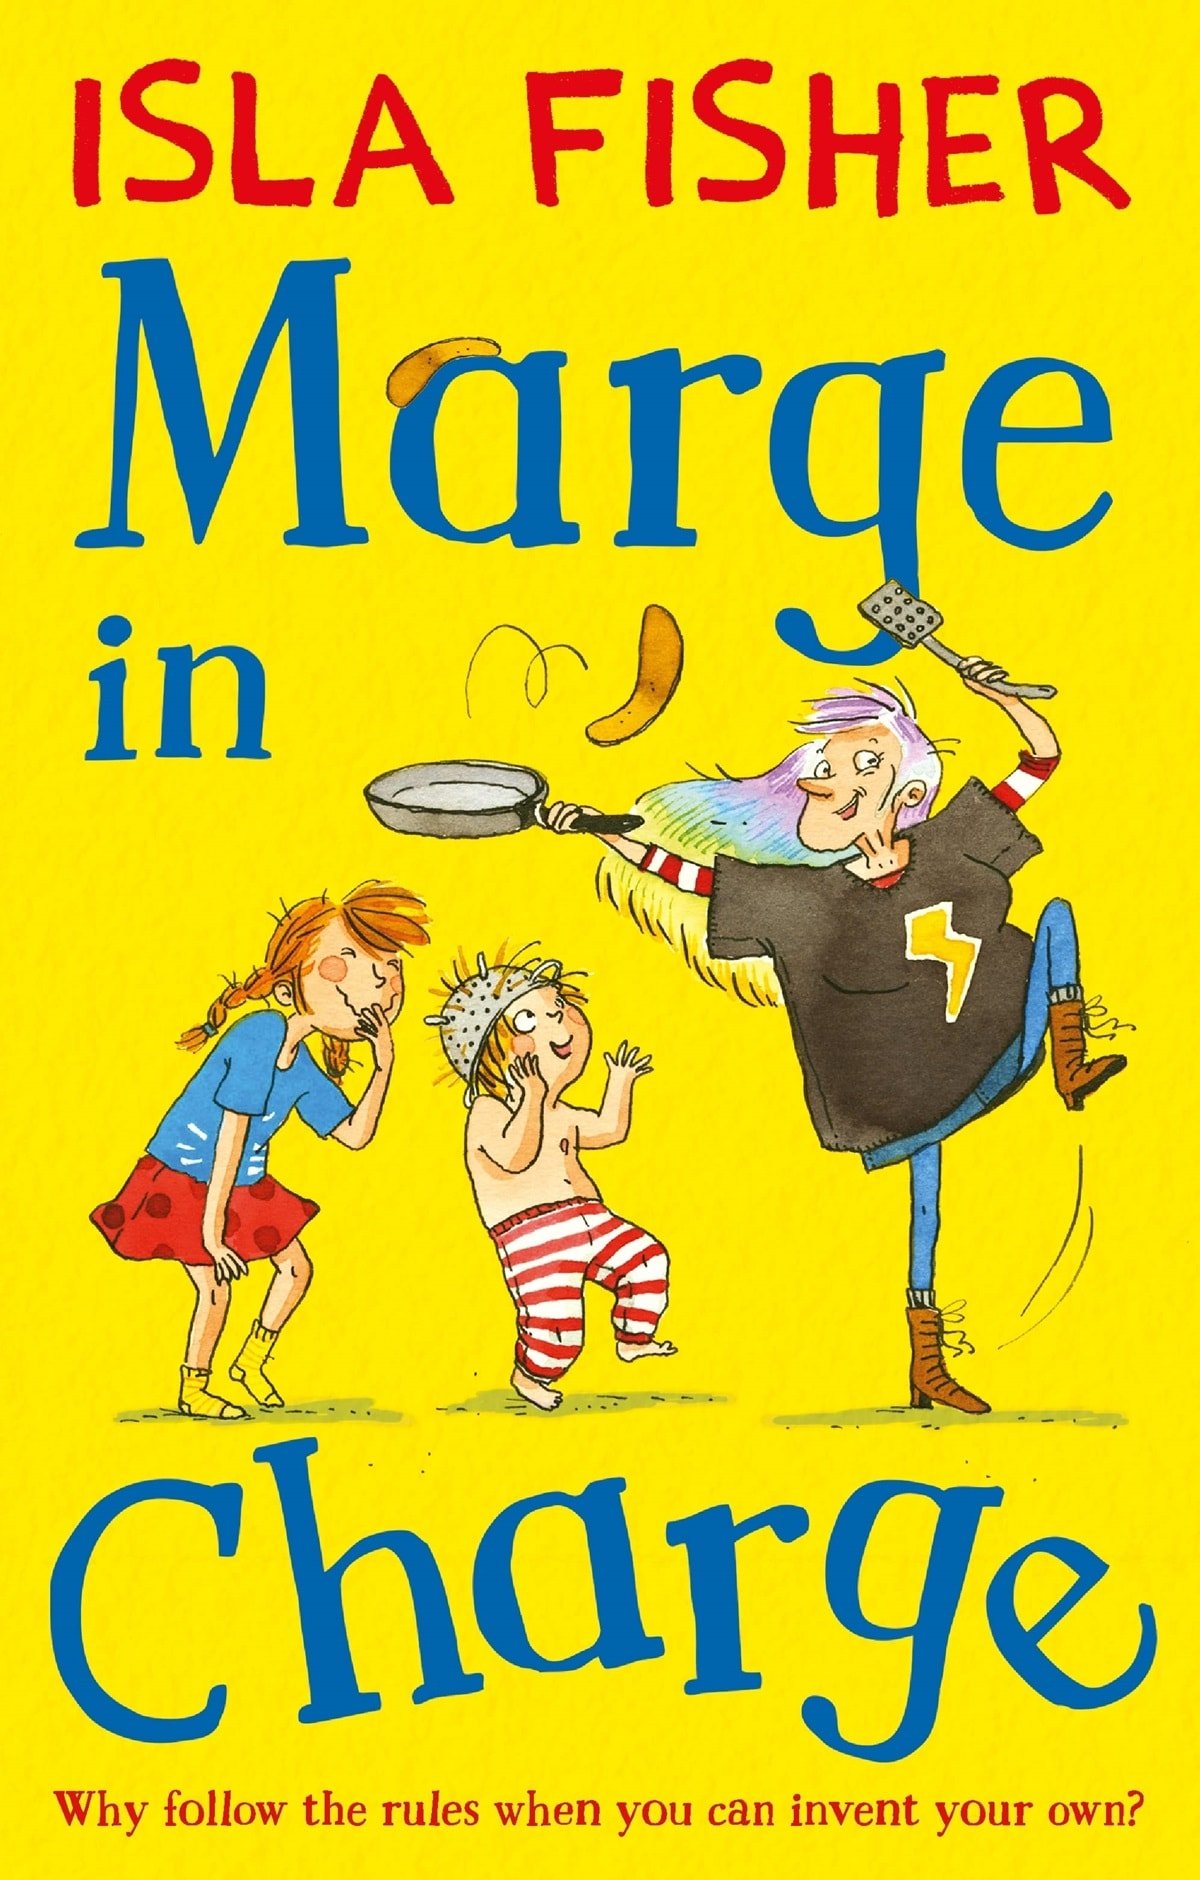 Isla Fisher's book Marge In Charge features three stories about siblings Jemima and Jake Button and their babysitter, Marge